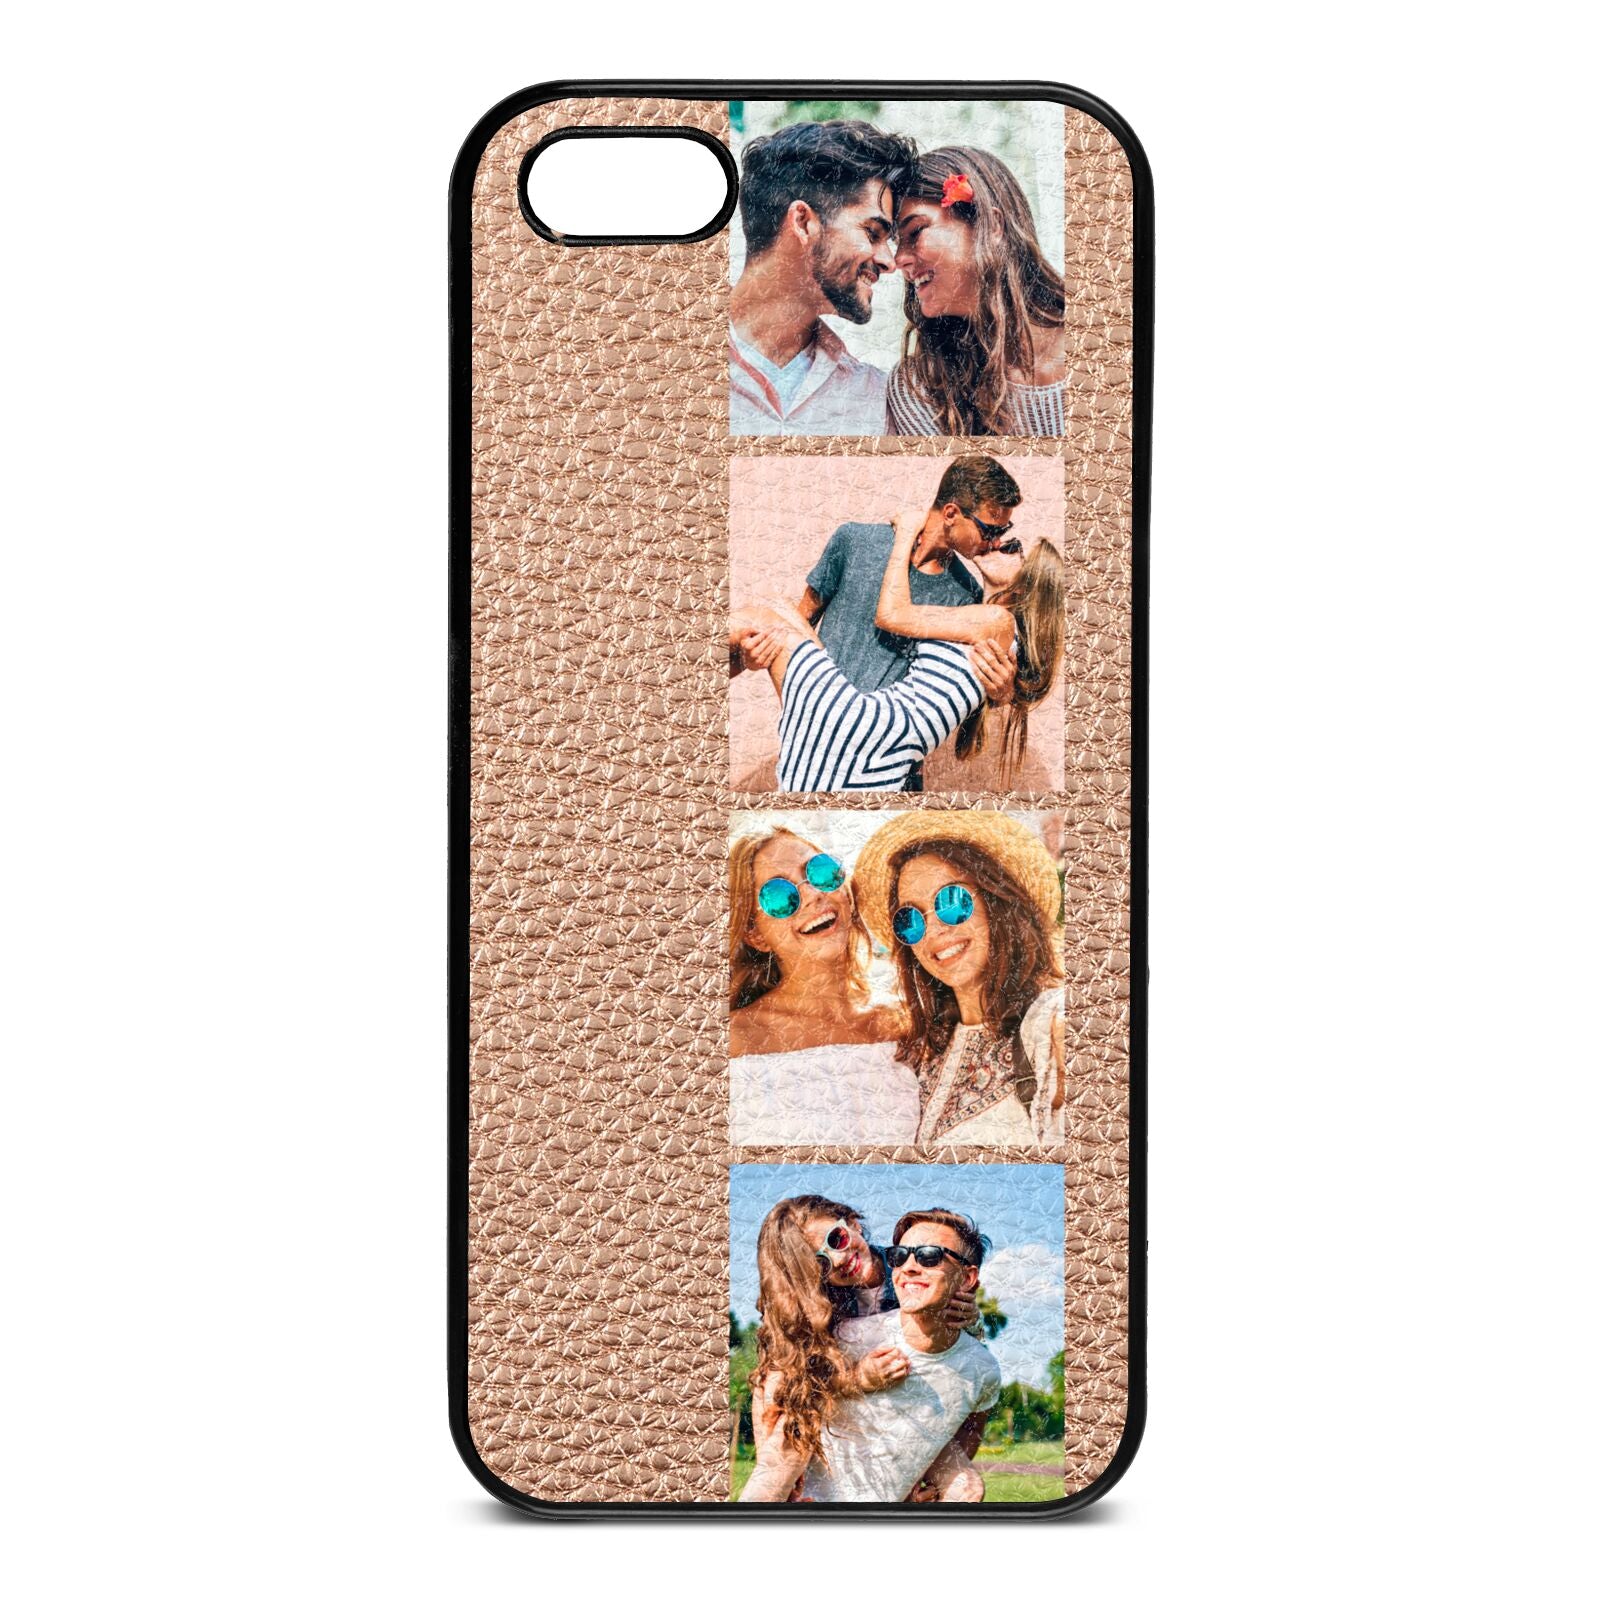 Photo Strip Montage Upload Rose Gold Pebble Leather iPhone 5 Case